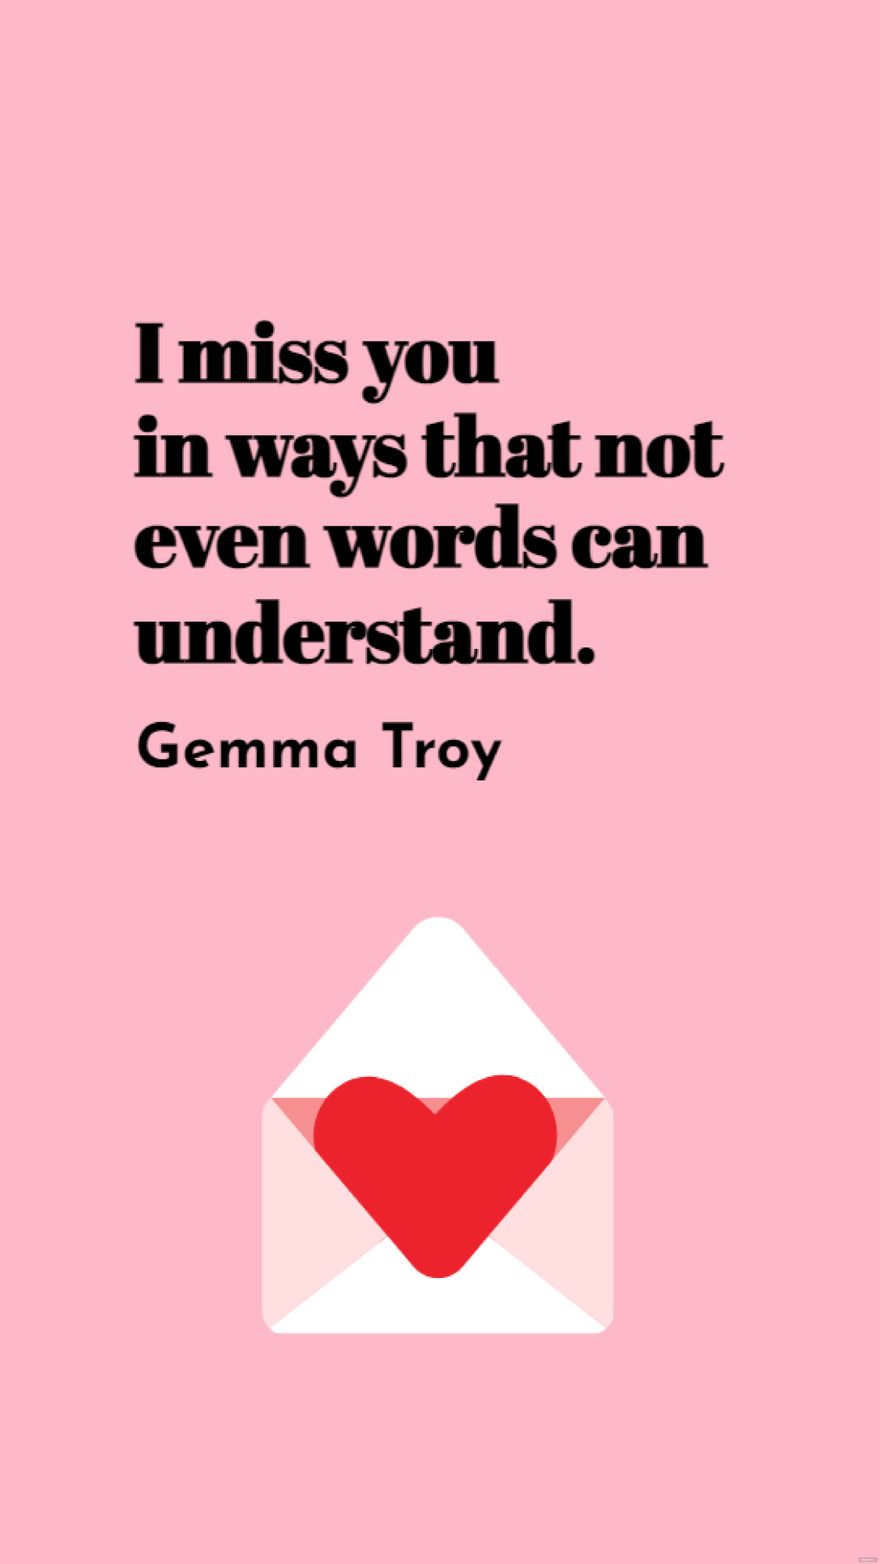 Gemma Troy - I miss you in ways that not even words can understand. in JPG